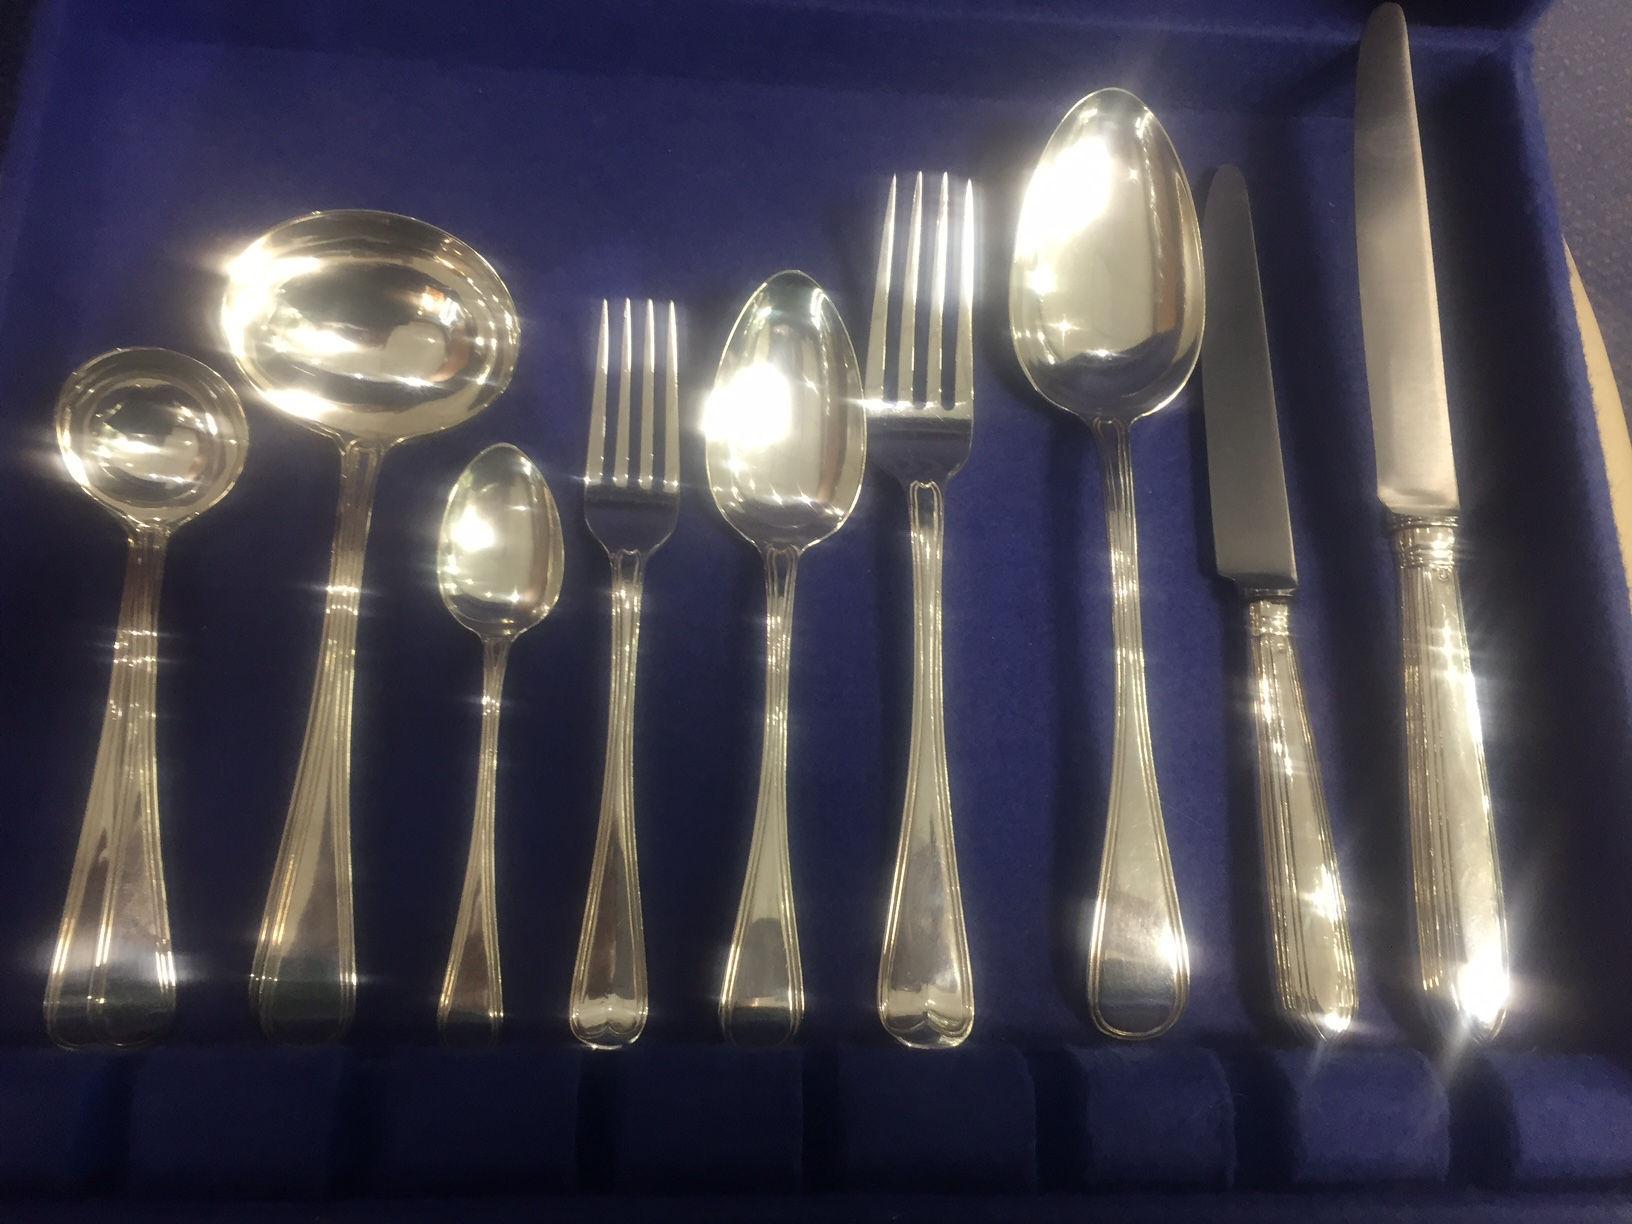 Rare George 111 period old English thread pattern antique silver flatware service for 12 all made in 1819-1820 by William Eley and William Fearn - 

2 sauce ladles 1821 - comprising 12 tablespoons 12 tableforks 12 dessert spoons 12 dessert forks